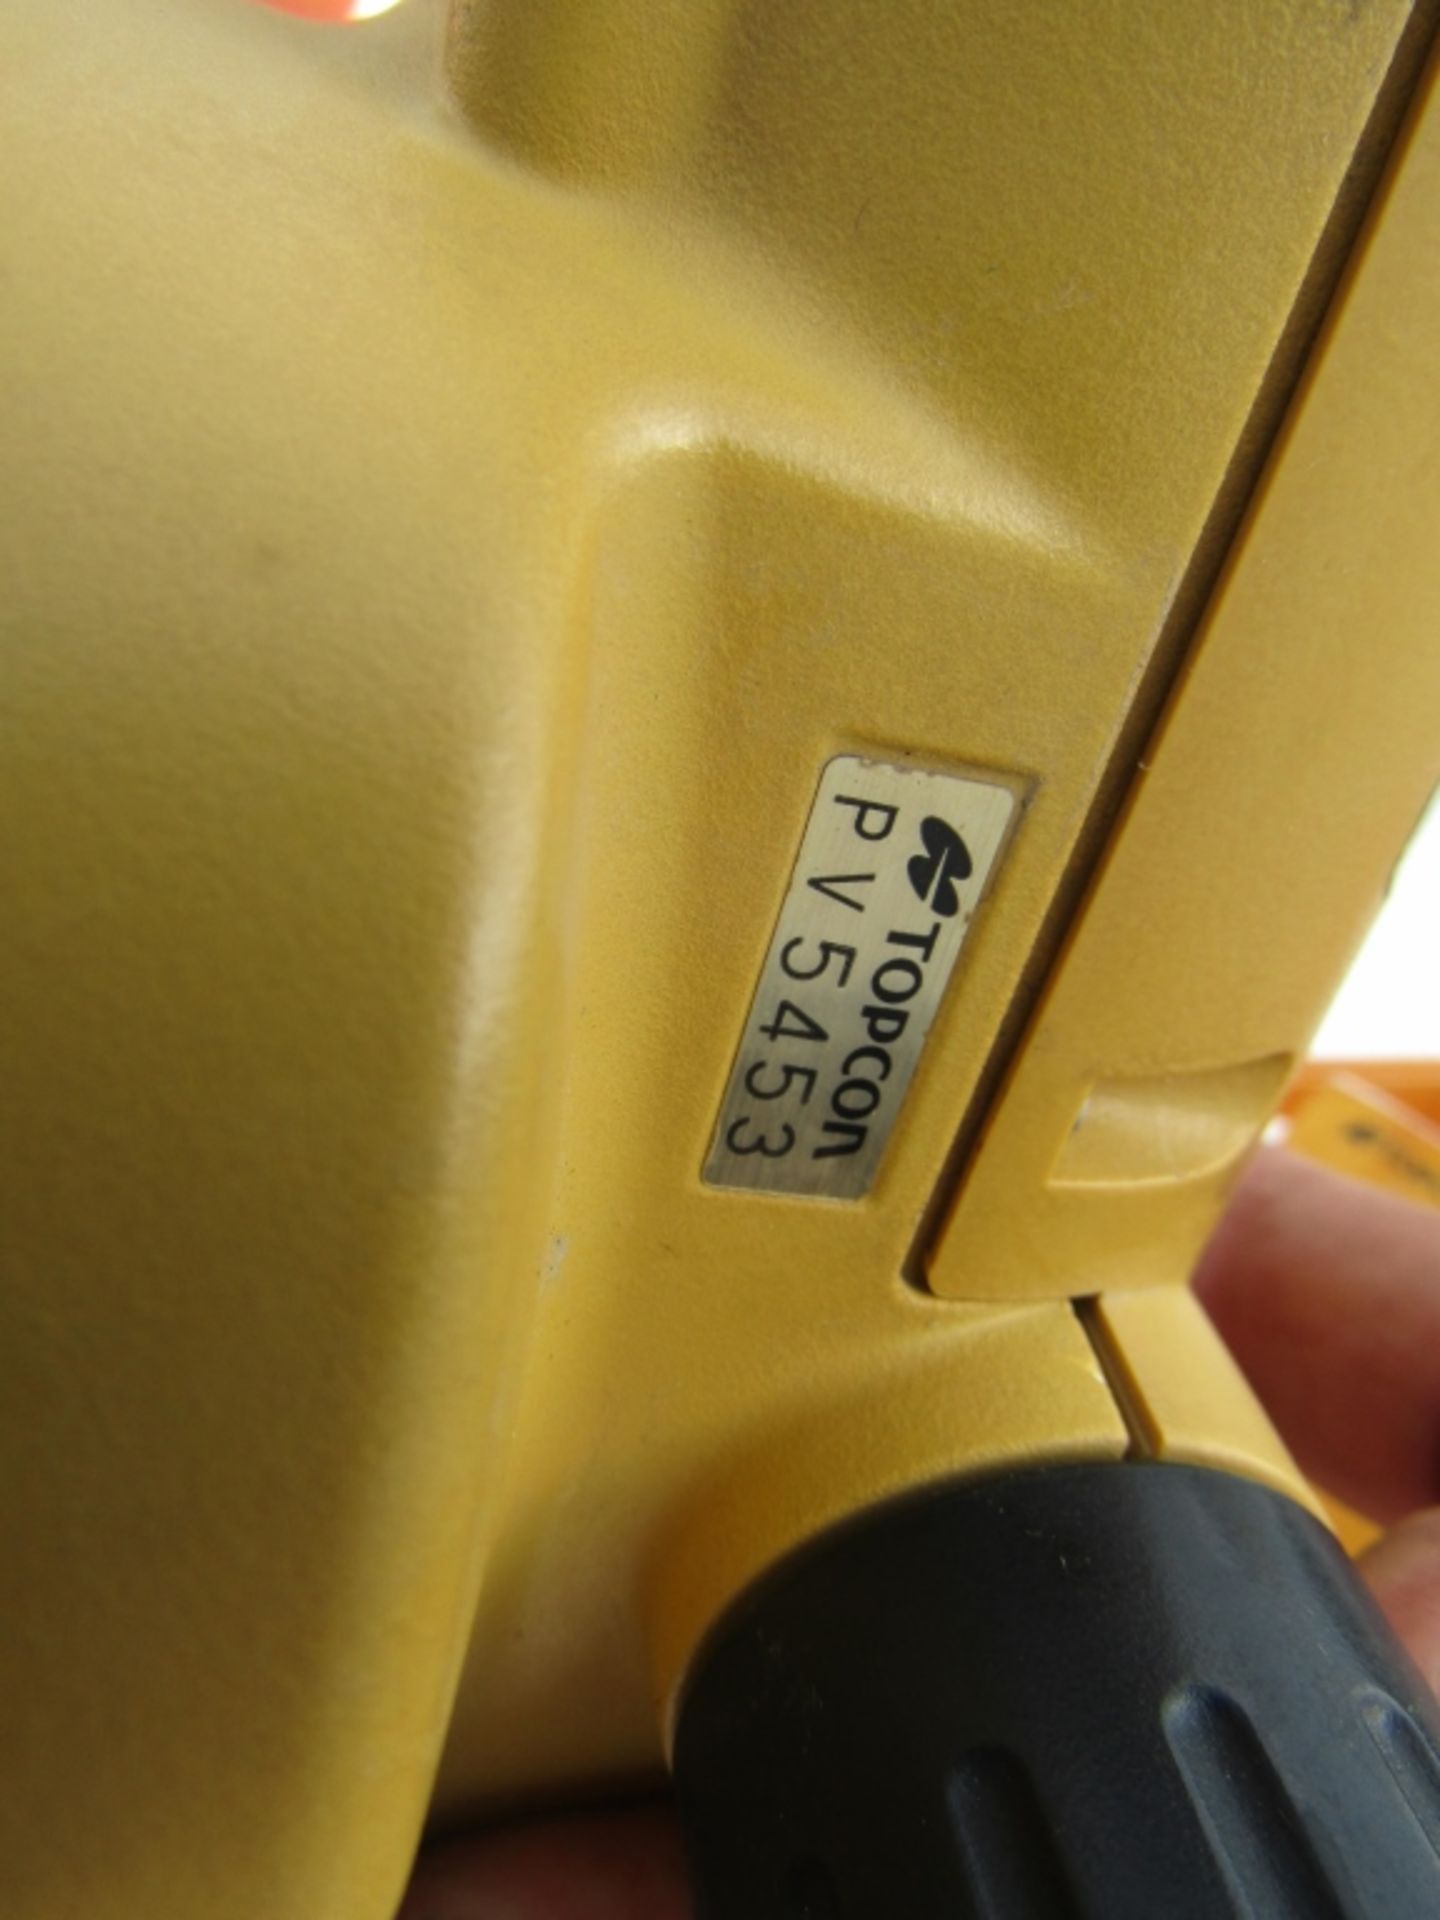 Topcon AT-G6 Auto Level, Model AT-G6, Serial #PV5453, - Image 3 of 3